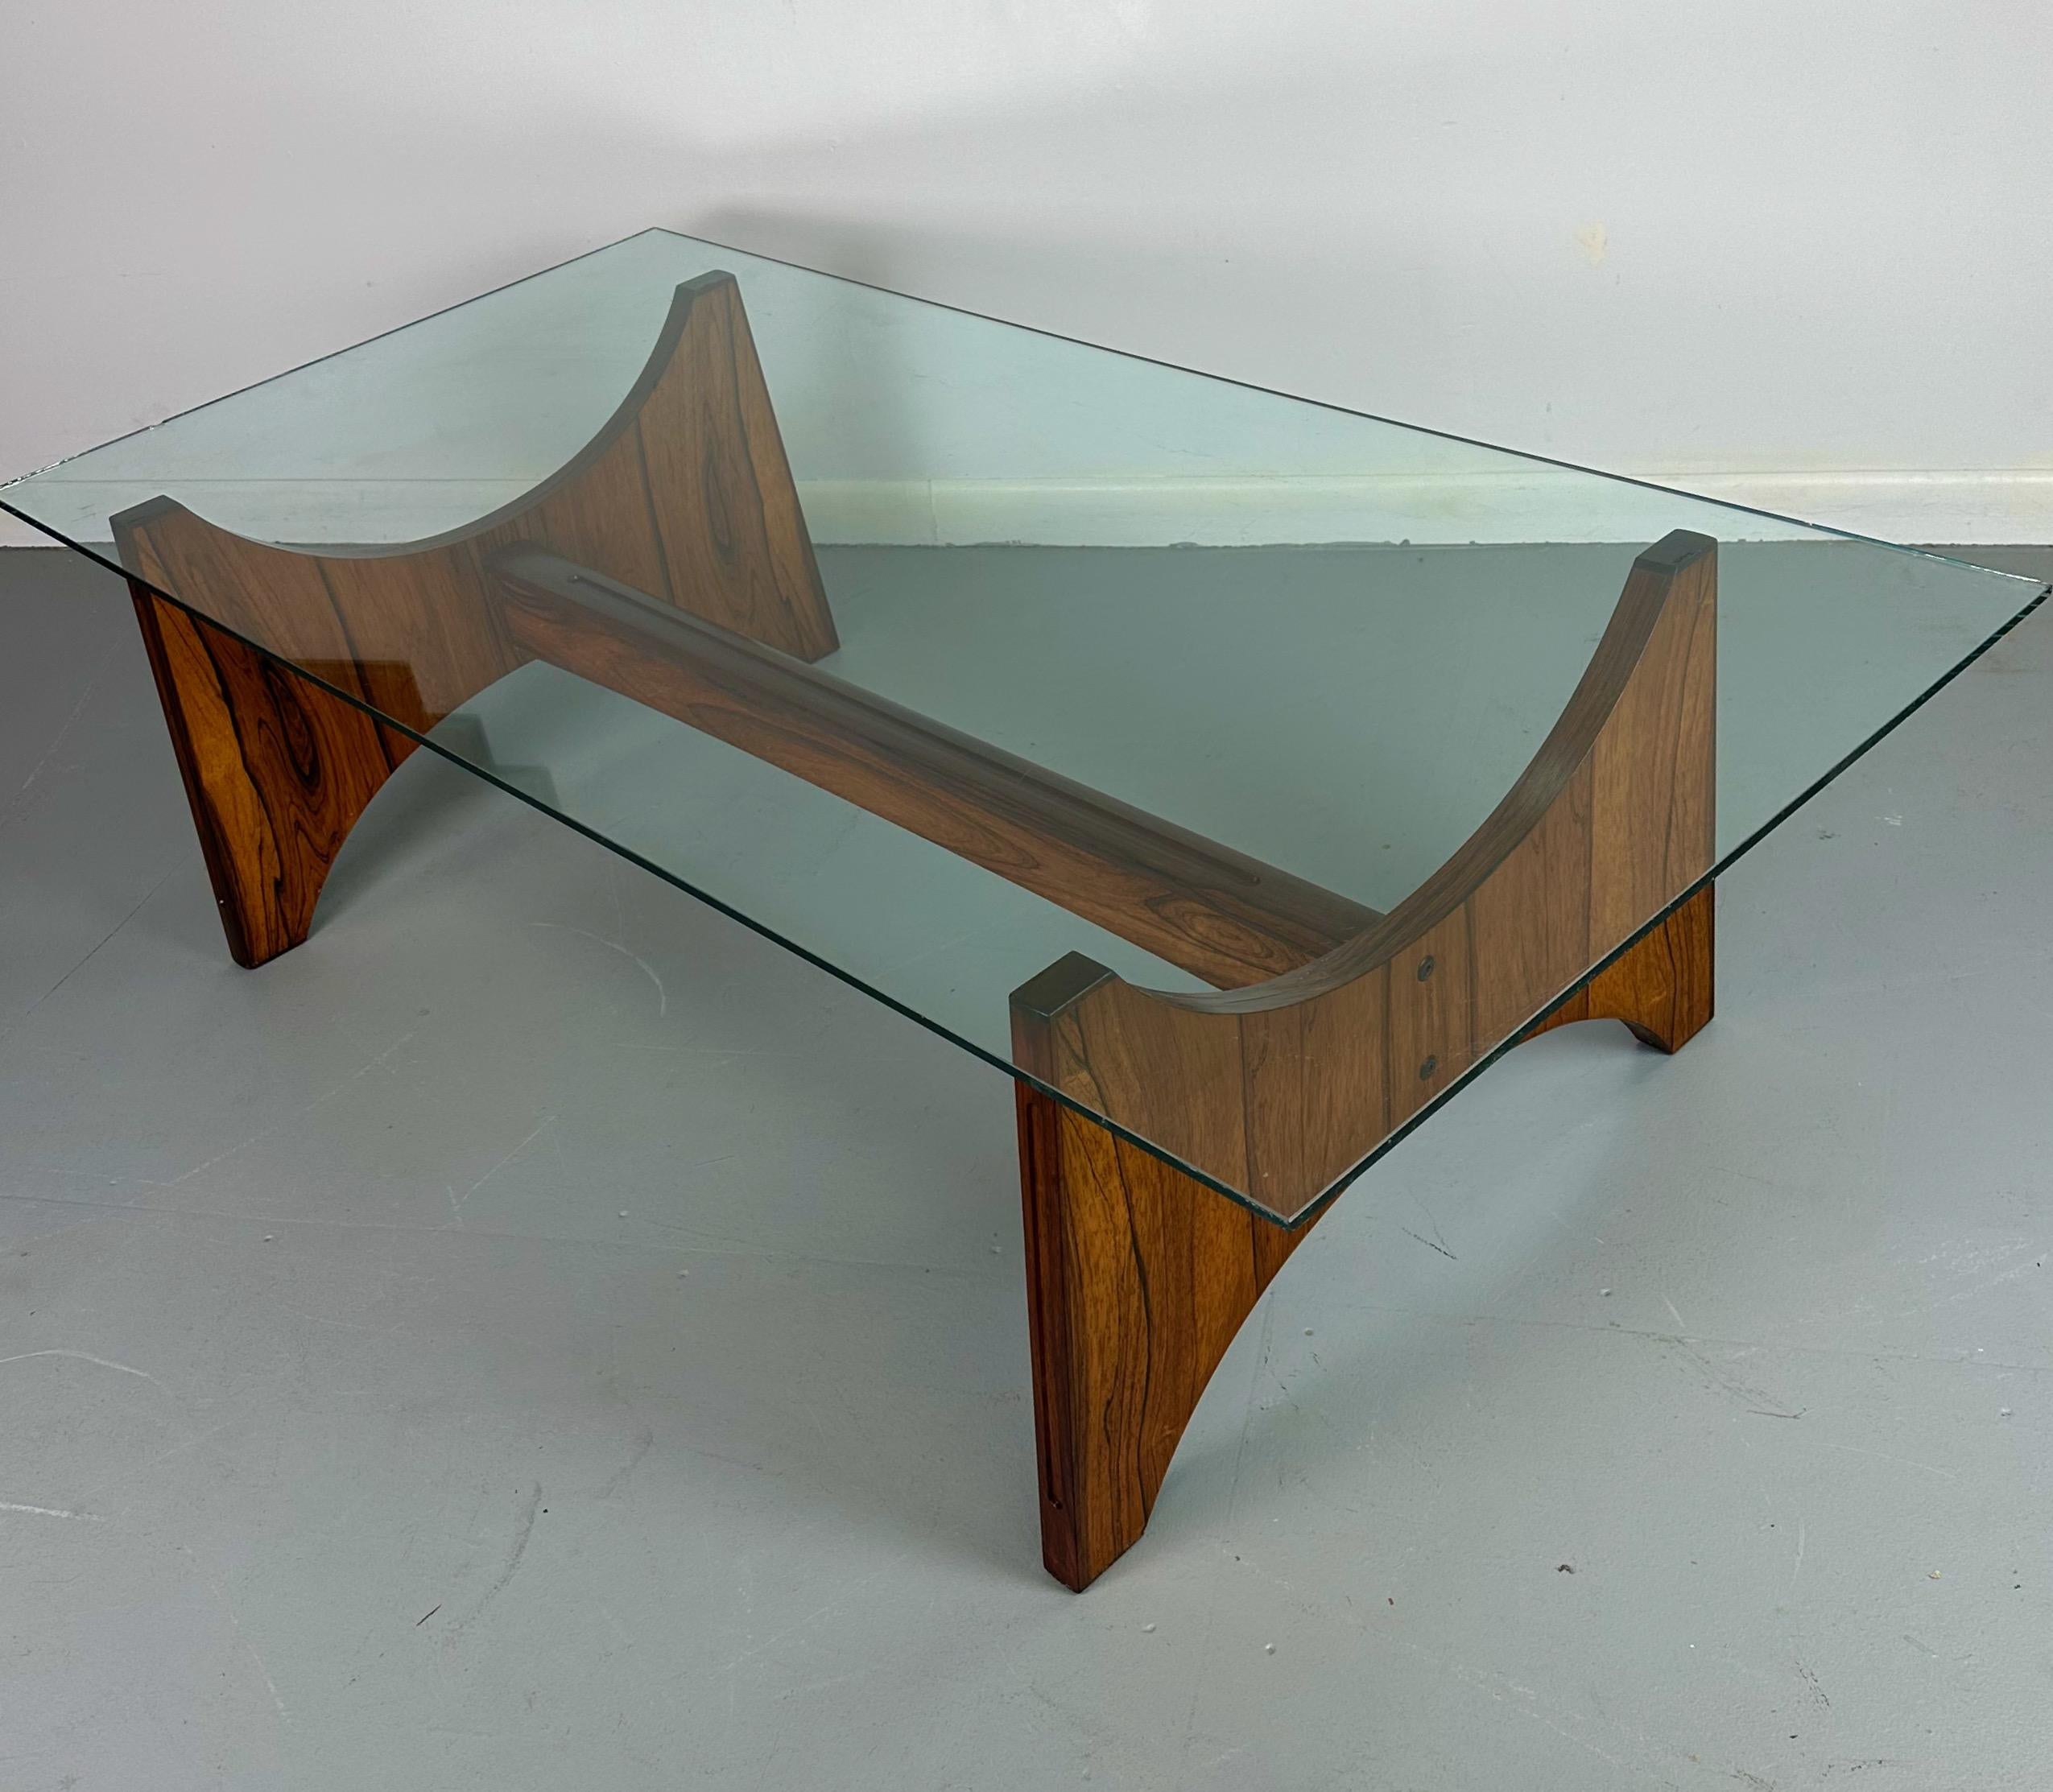 A vintage 1970s Danish coffee table by Torpe Mobelfabrikk Norway in Brazilian rosewood.This table has two arch shaped end pieces with a cross bar connecting them. There is an incised design on the edge of each piece. In good original condition with